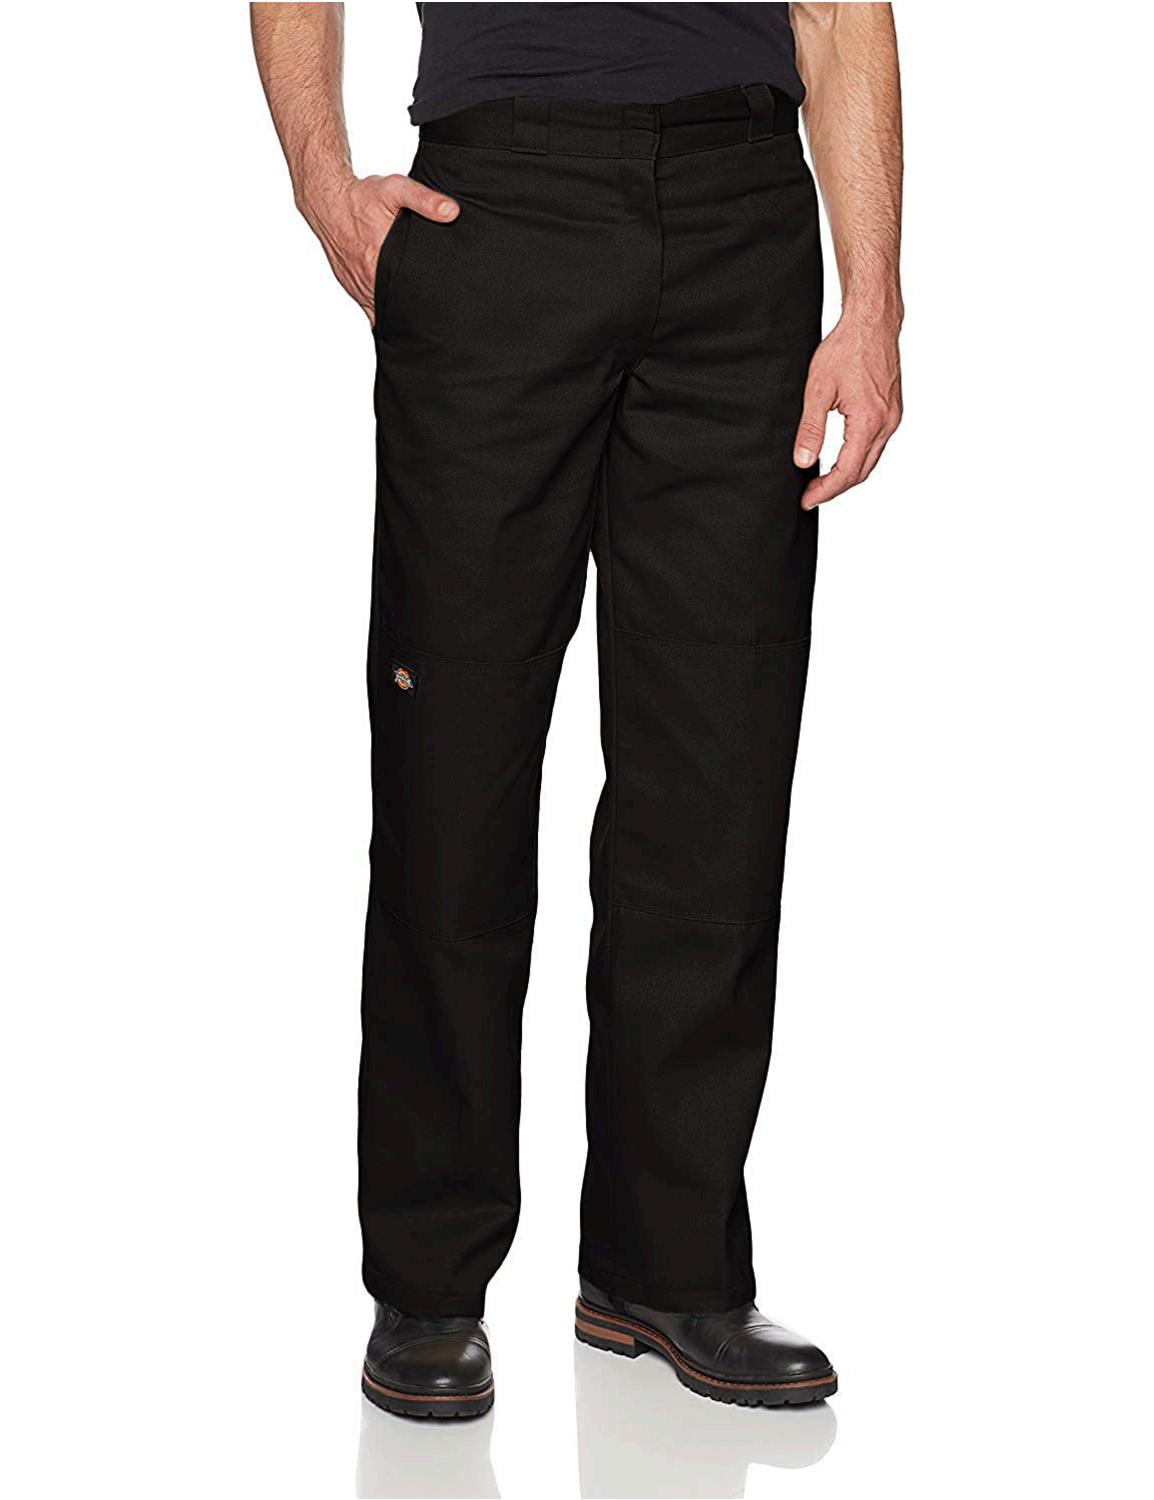 Dickies Men's Loose Fit Double Knee Twill Work Pant,, Black, Size 34W x ...